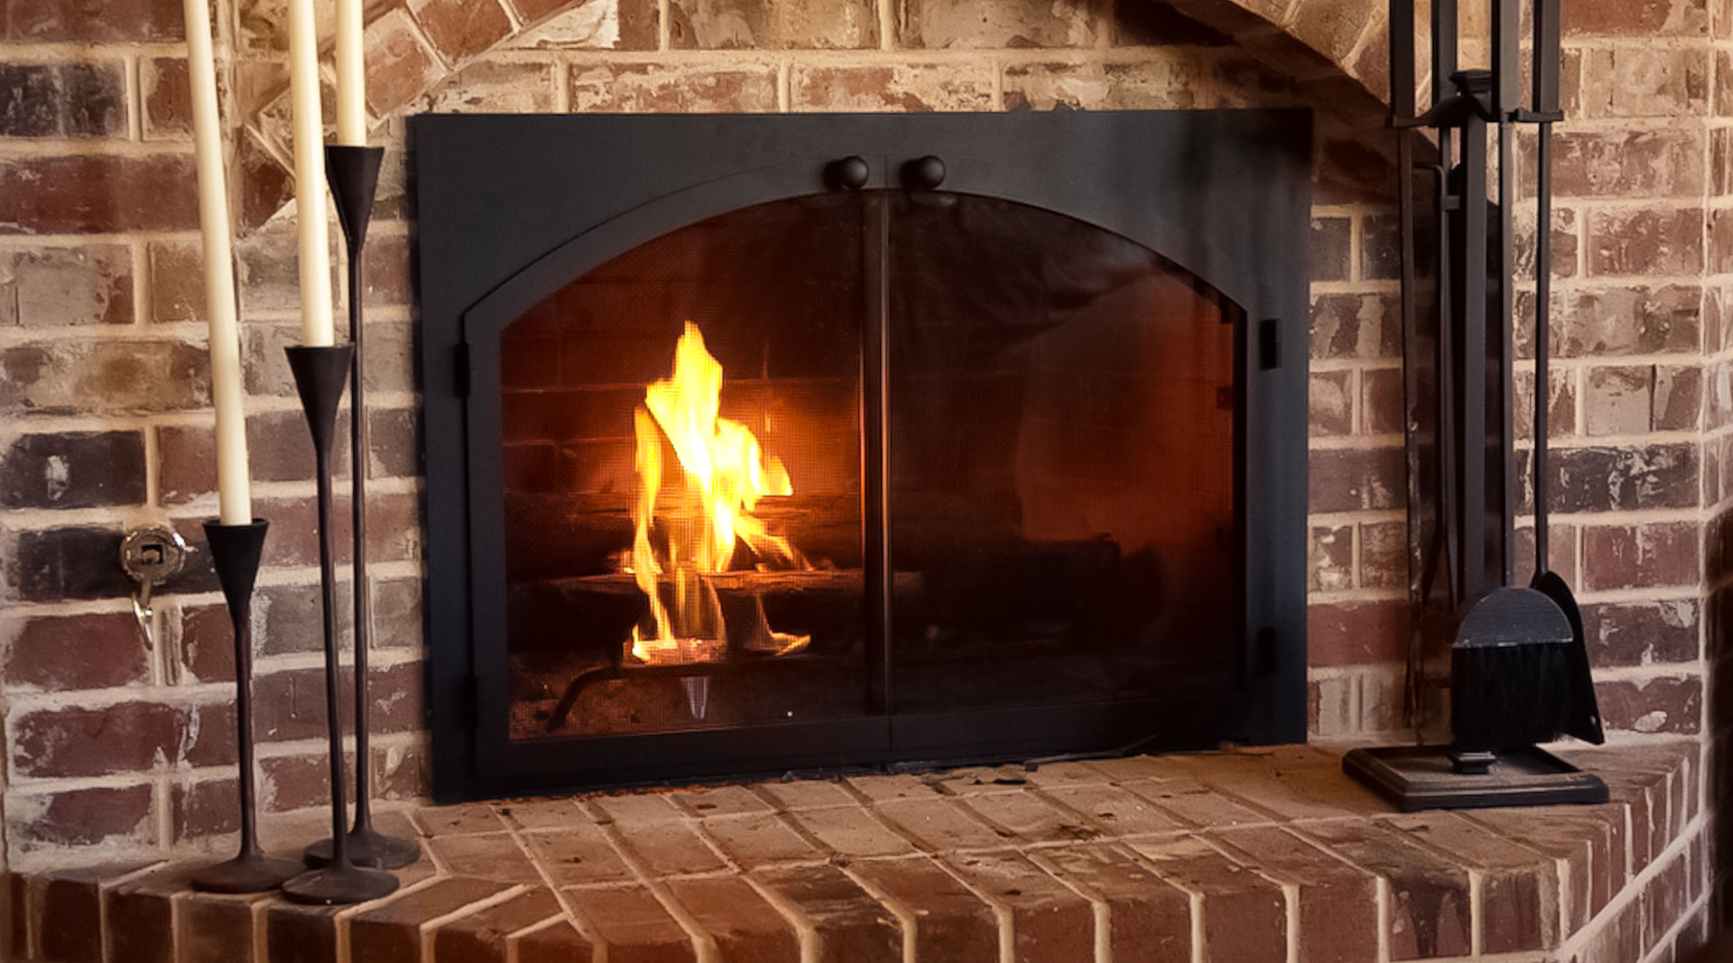 How To Install Fireplace Doors On Brick